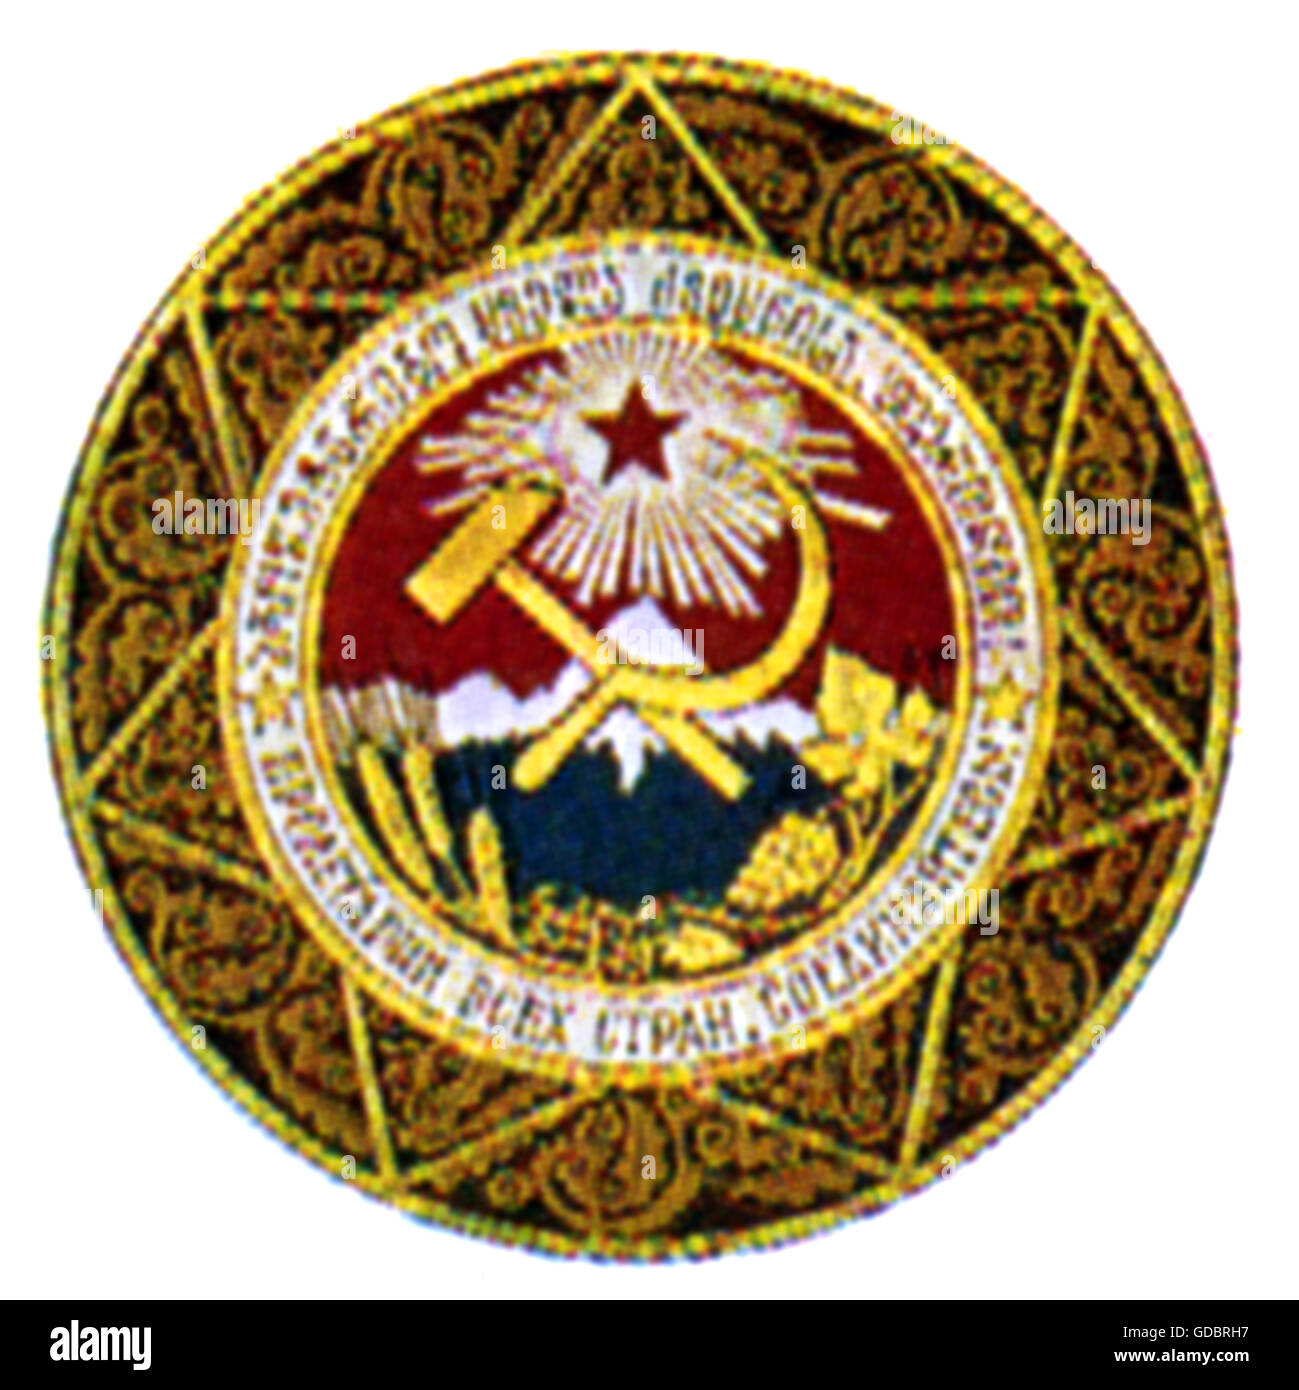 heraldry, coat of arms, Georgia, state coat of arms of the Georgian Soviet Socialist Republic (GSSR), 1936 - 1991, Additional-Rights-Clearences-Not Available Stock Photo